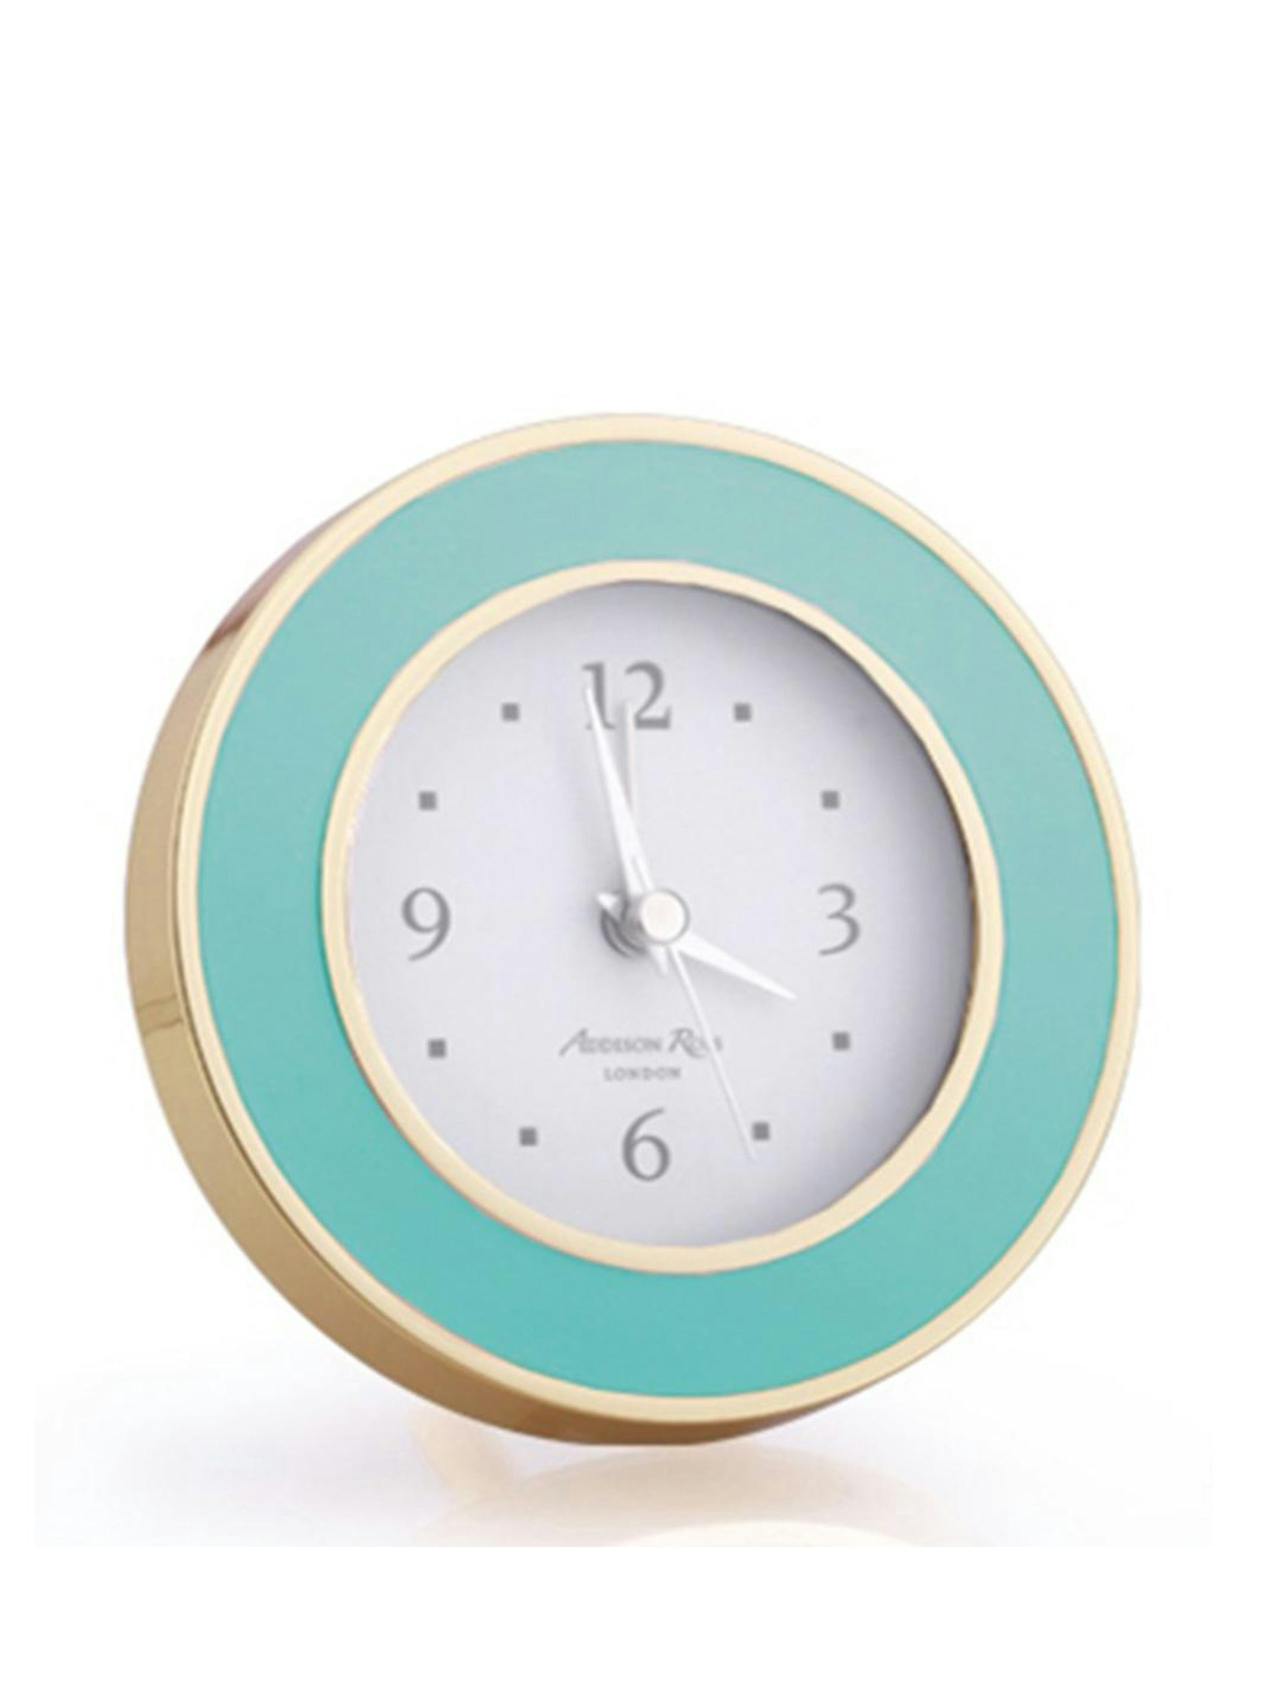 Turquoise and gold alarm clock